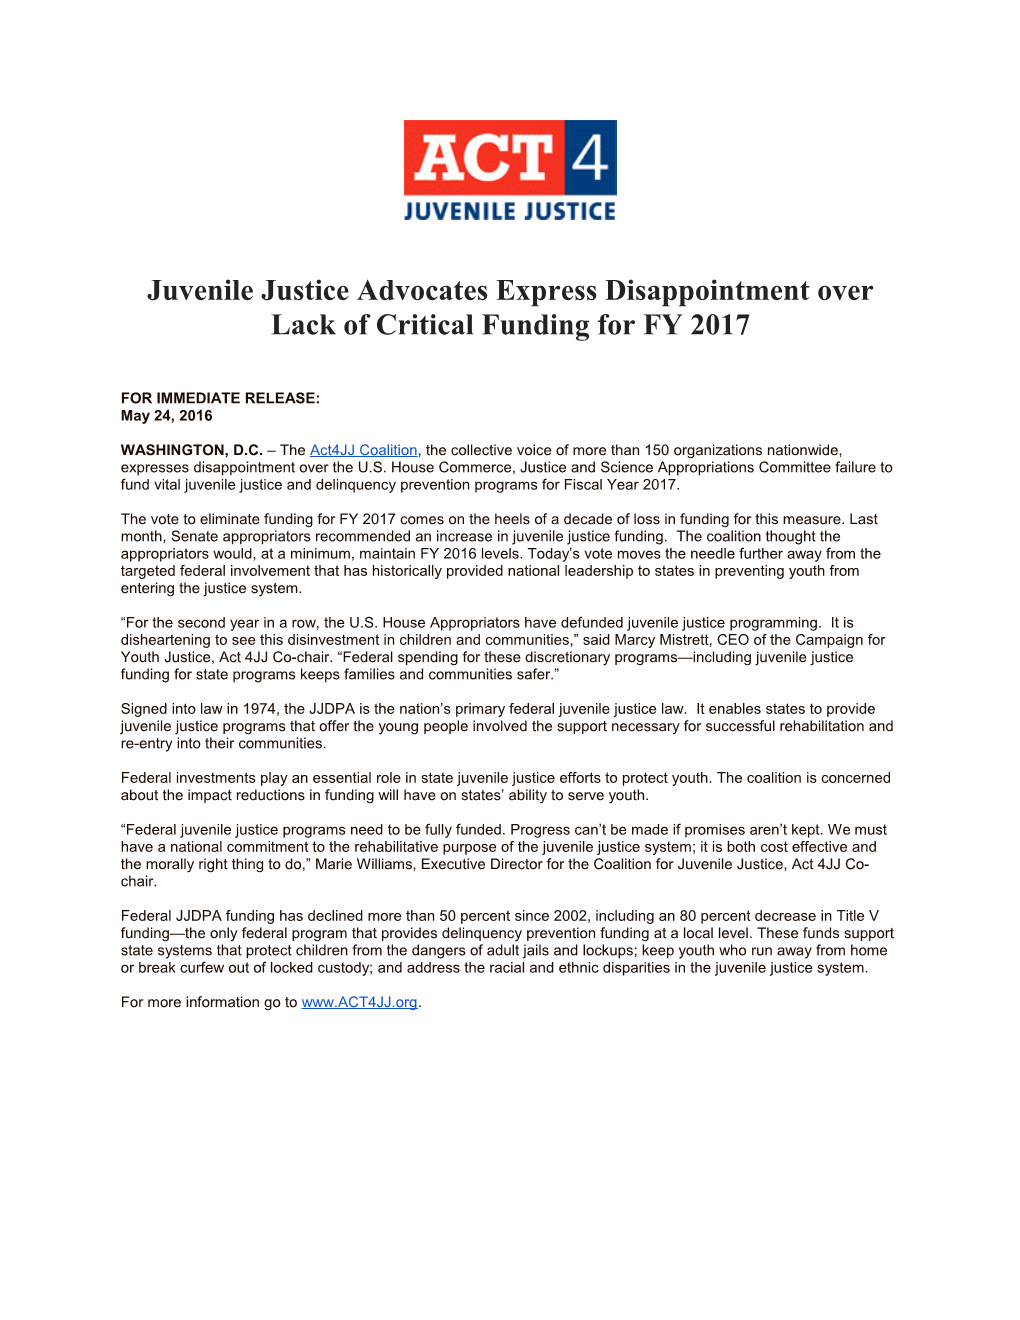 Juvenile Justice Advocates Express Disappointment Over Lack of Critical Funding for FY 2017